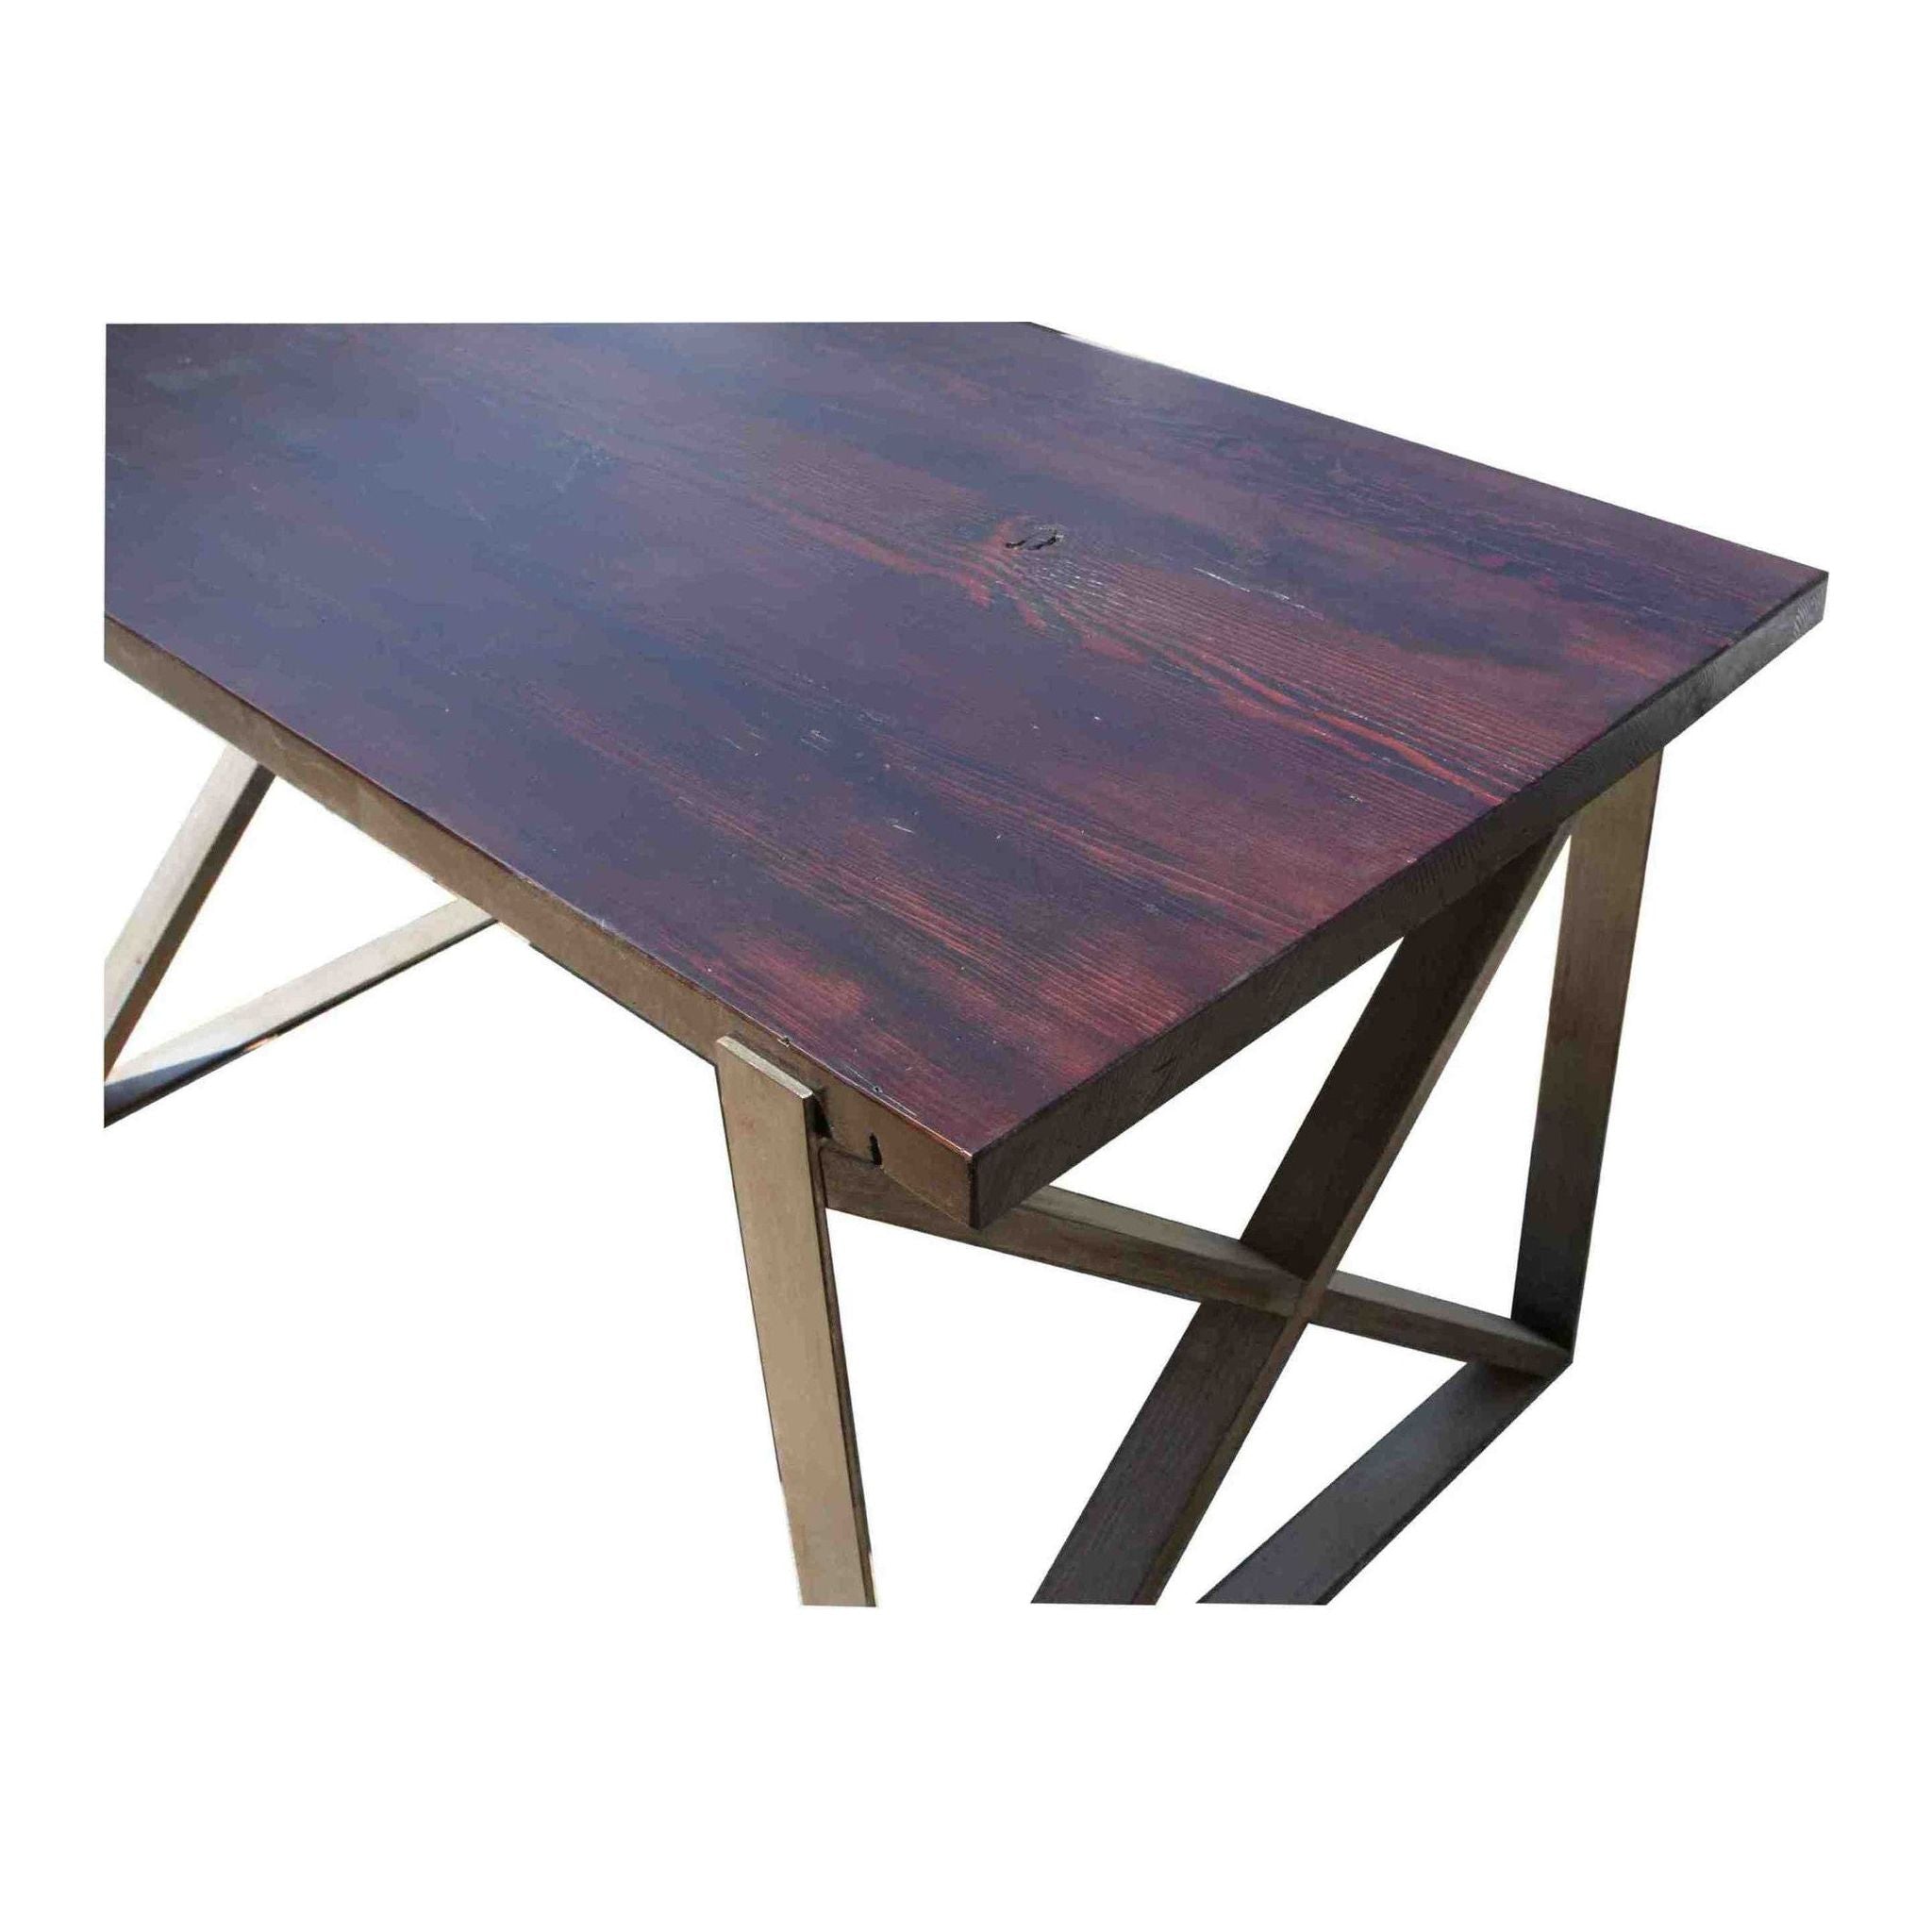 Chicago Industrial Dining Table In Reclaimed Wood Mortise Tenon